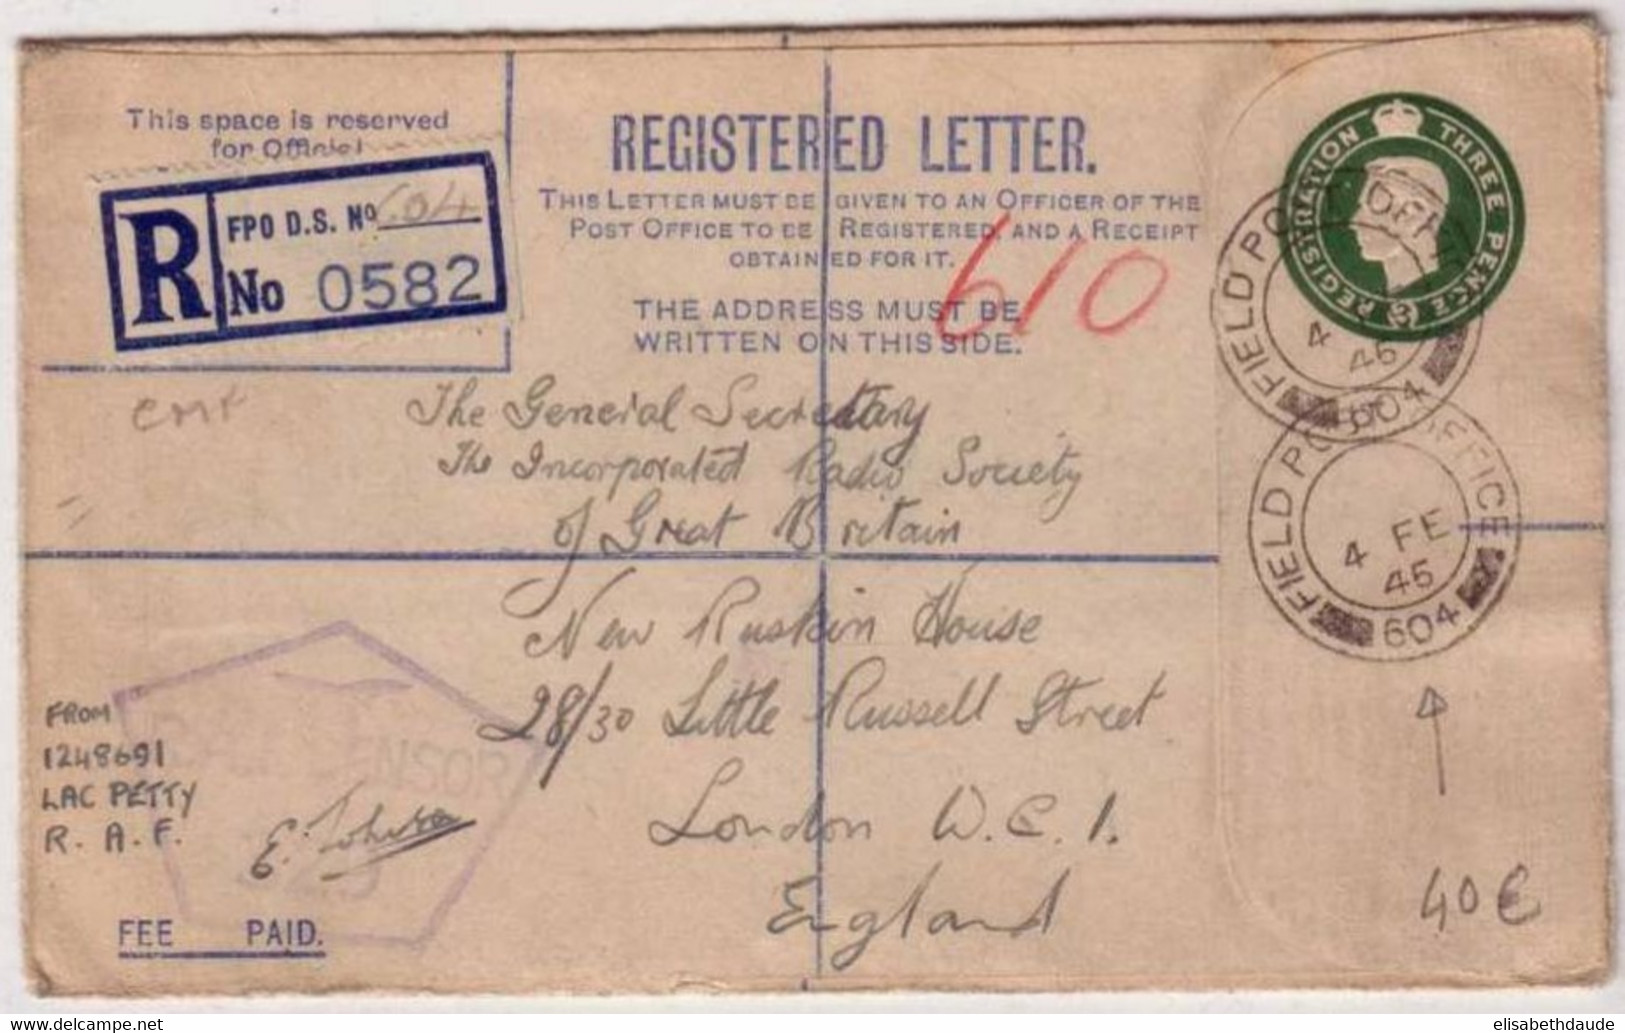 GUERRE 39/45 :1945  LETTRE RECOMMANDEE MILITAIRE (FIELD POST OFFICE N°604)   - CENSURE RAF- - Lettres & Documents